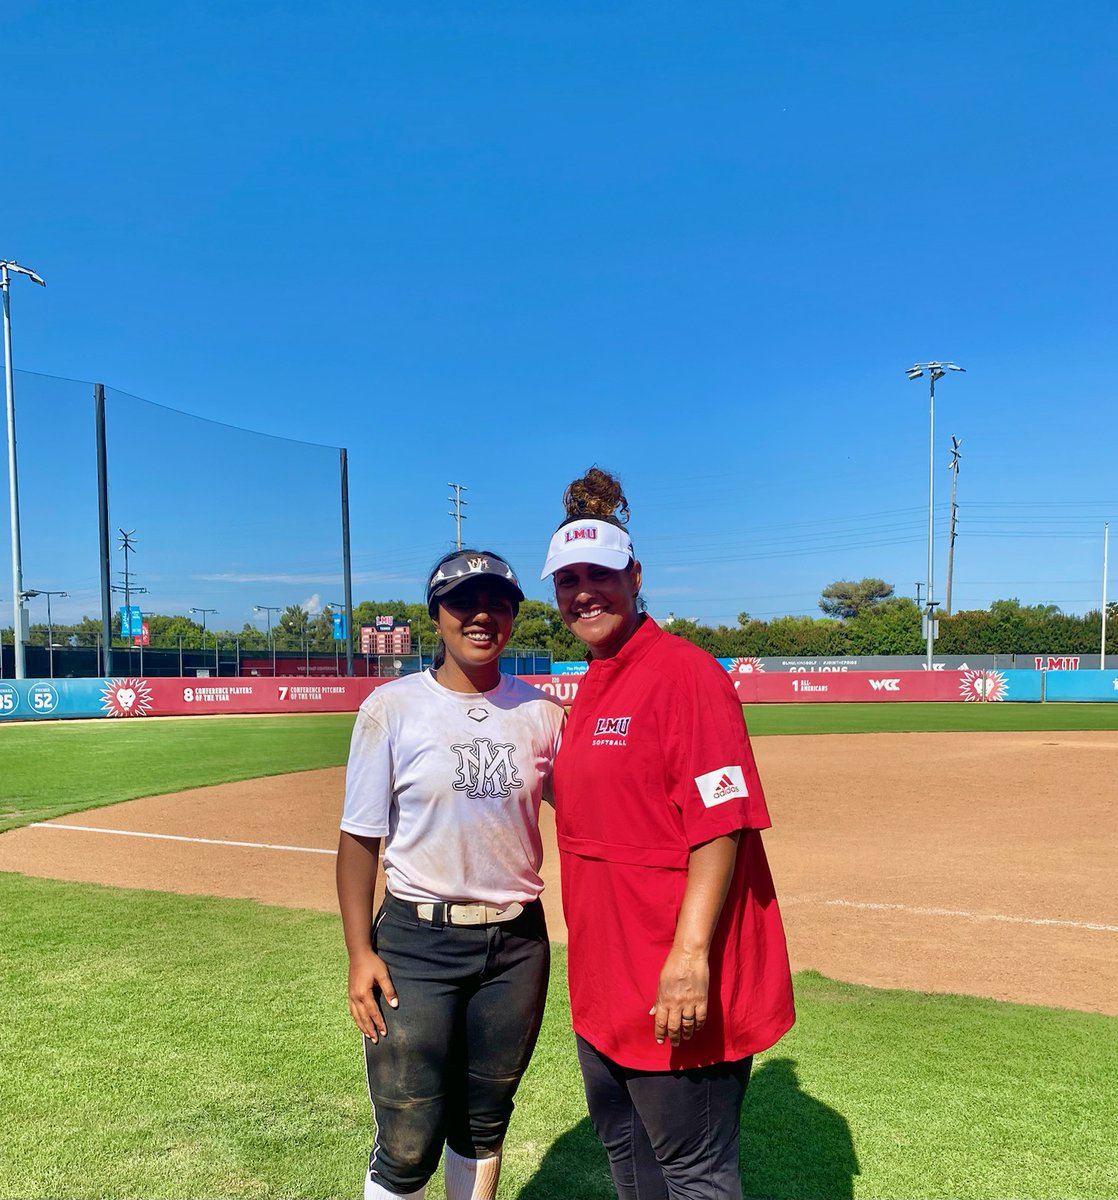 Another great softball day. Thank you coach @tairiaflowers @shelbyjeff20 and the players for putting on a wonderful camp. I always love coming to the beautiful LMU campus for the opportunity to play softball and to learn from one of the best in the game. It was a ton of fun.